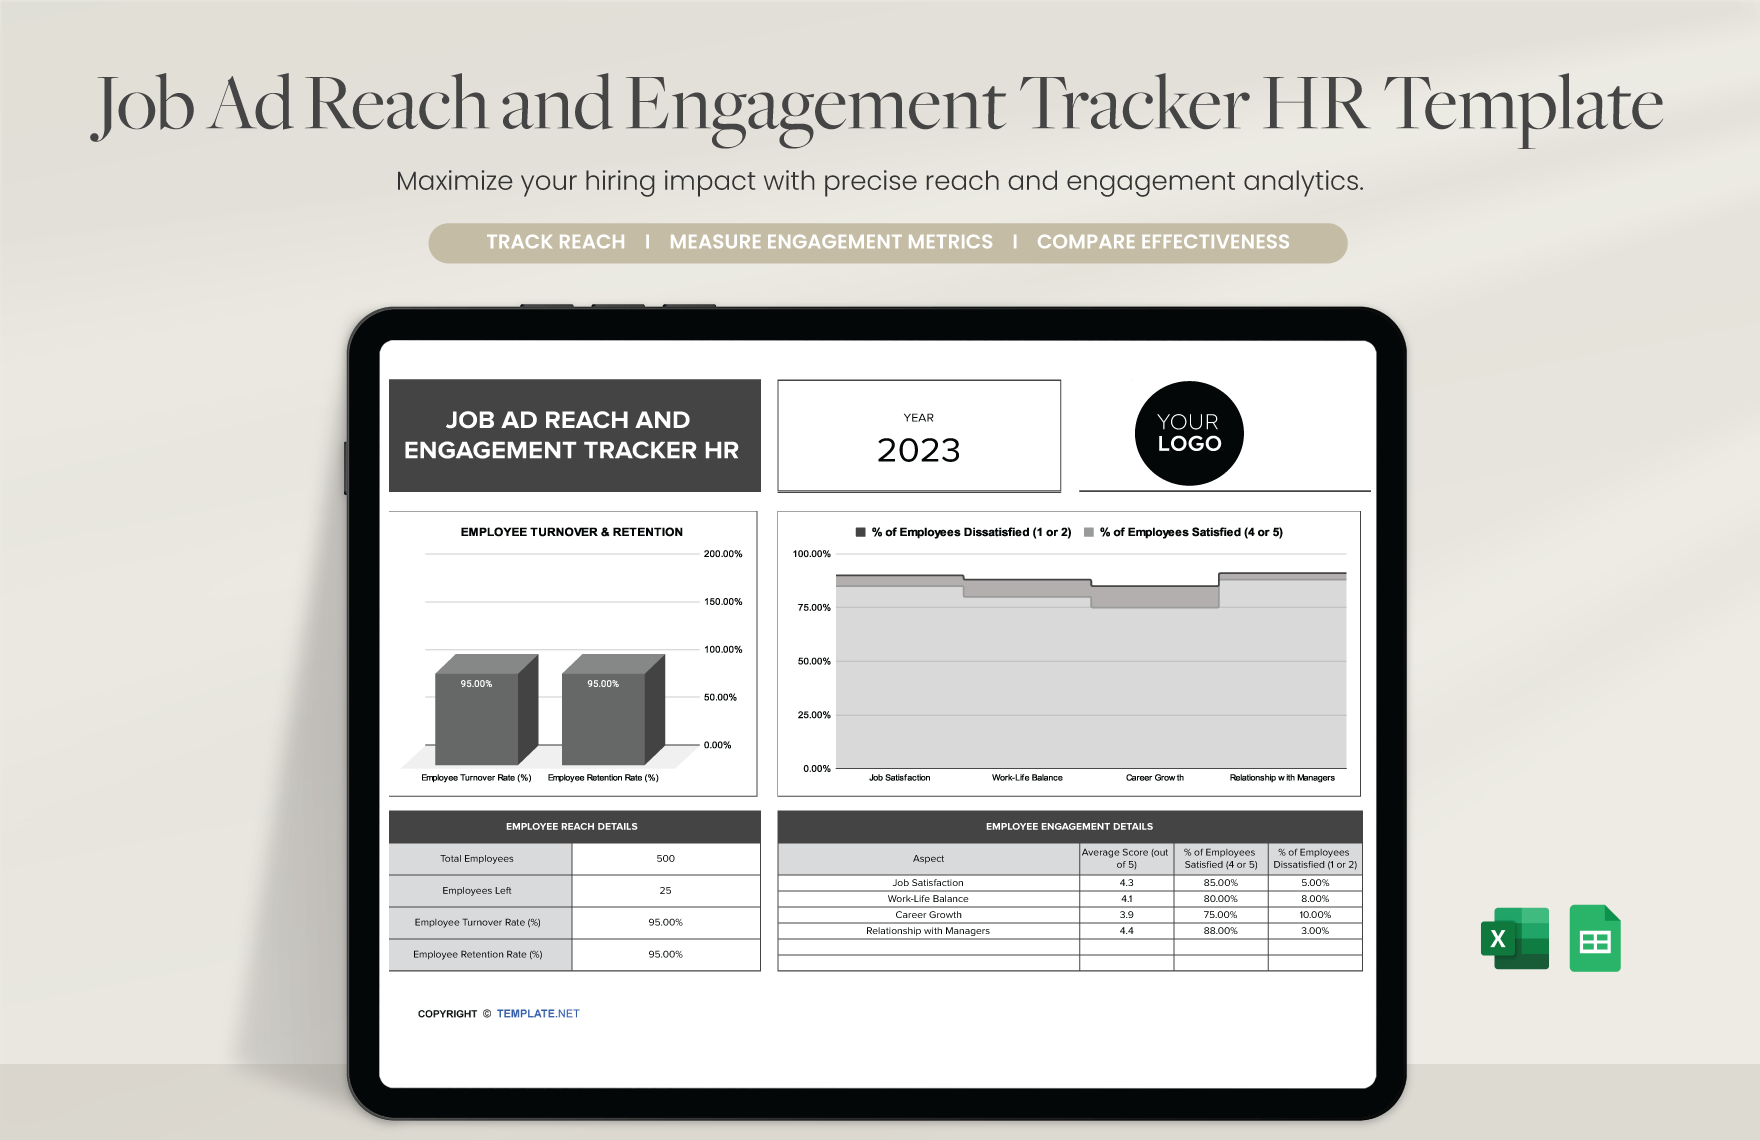 Job Ad Reach and Engagement Tracker HR Template